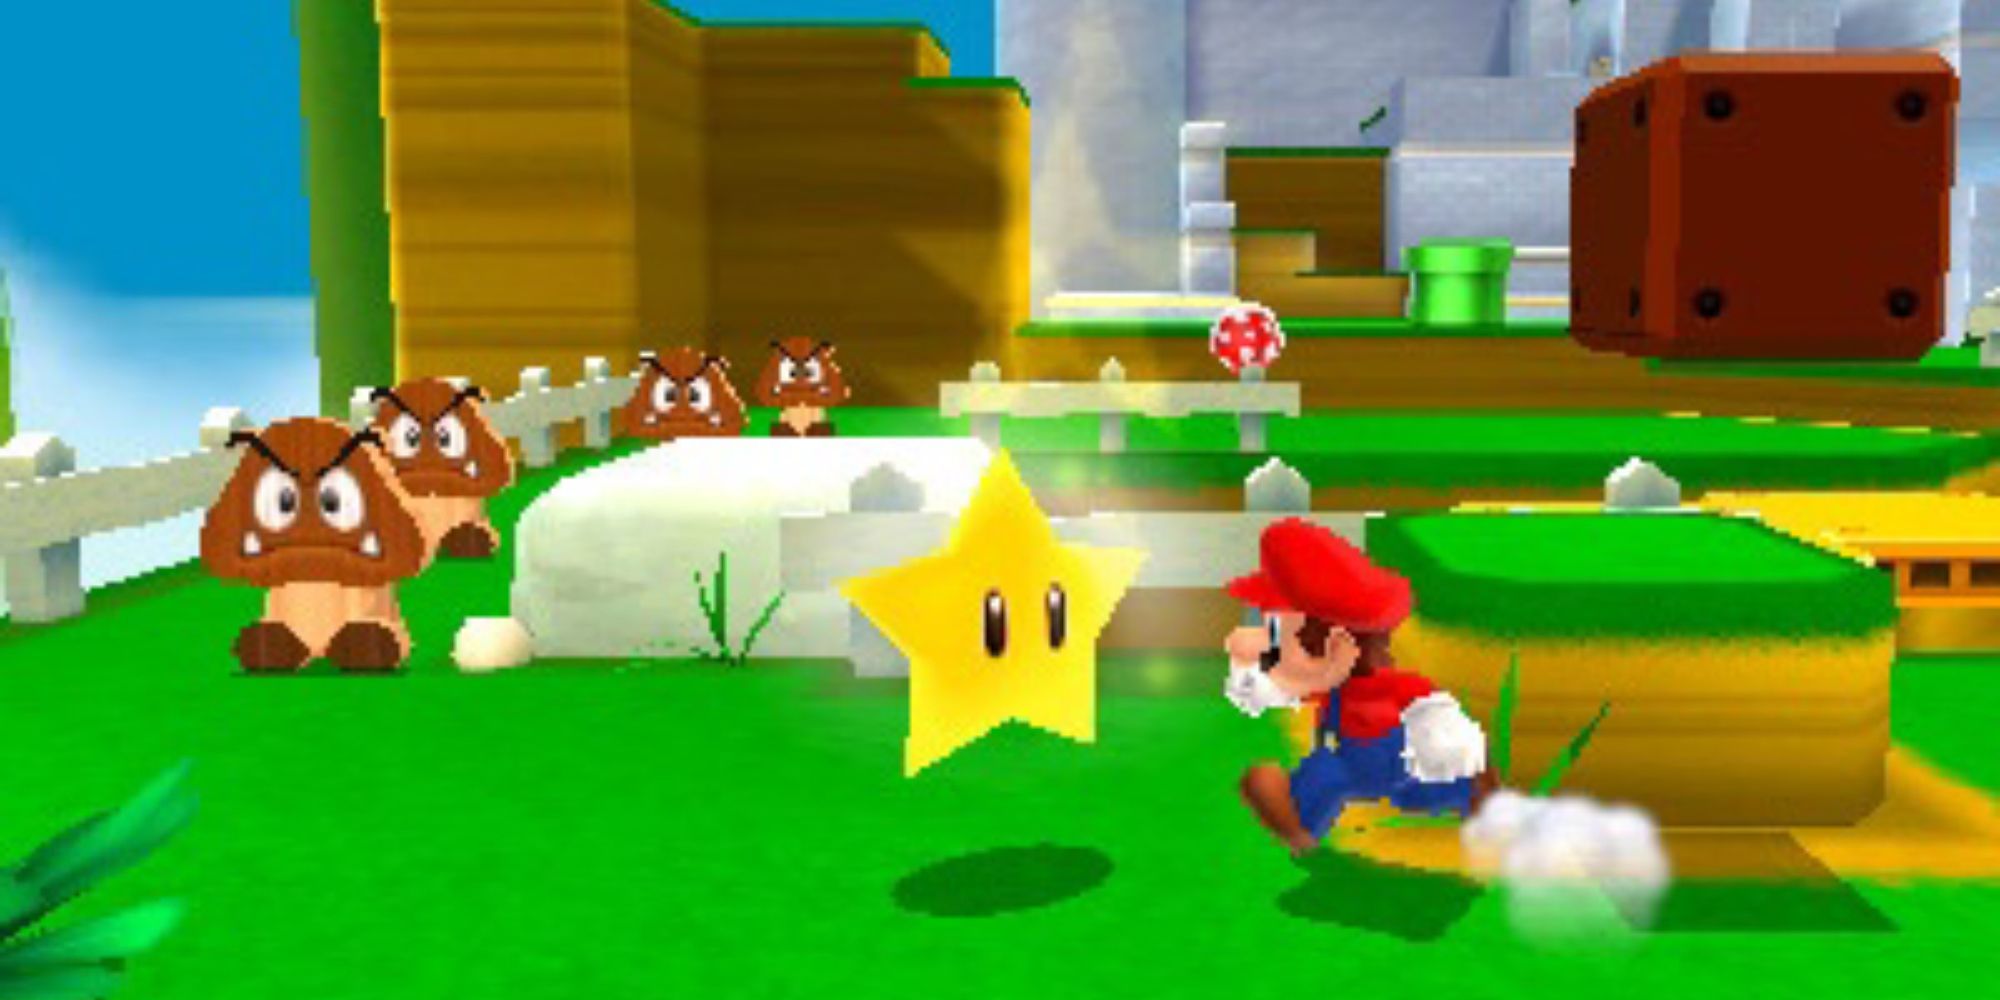 Mario running for a star in 3D Land.